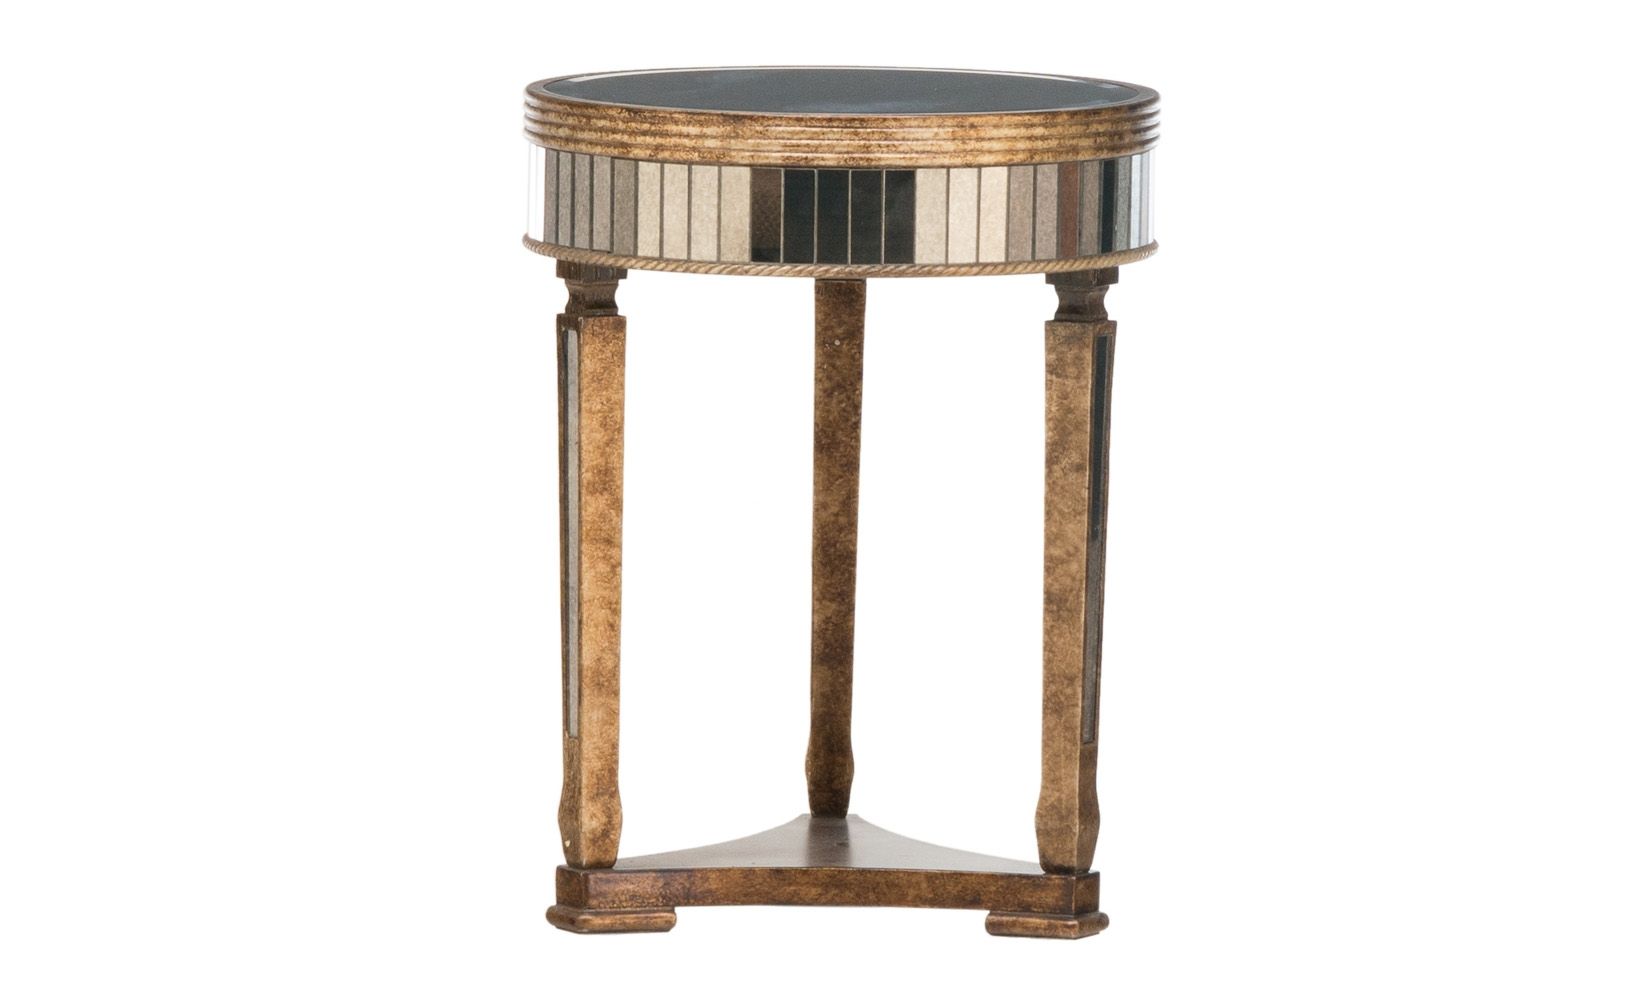 mottled mirror accent table small space ideas mirrored beautiful piece with ornate detailing that will give your living room exquisite high end look make side furniture tulsa